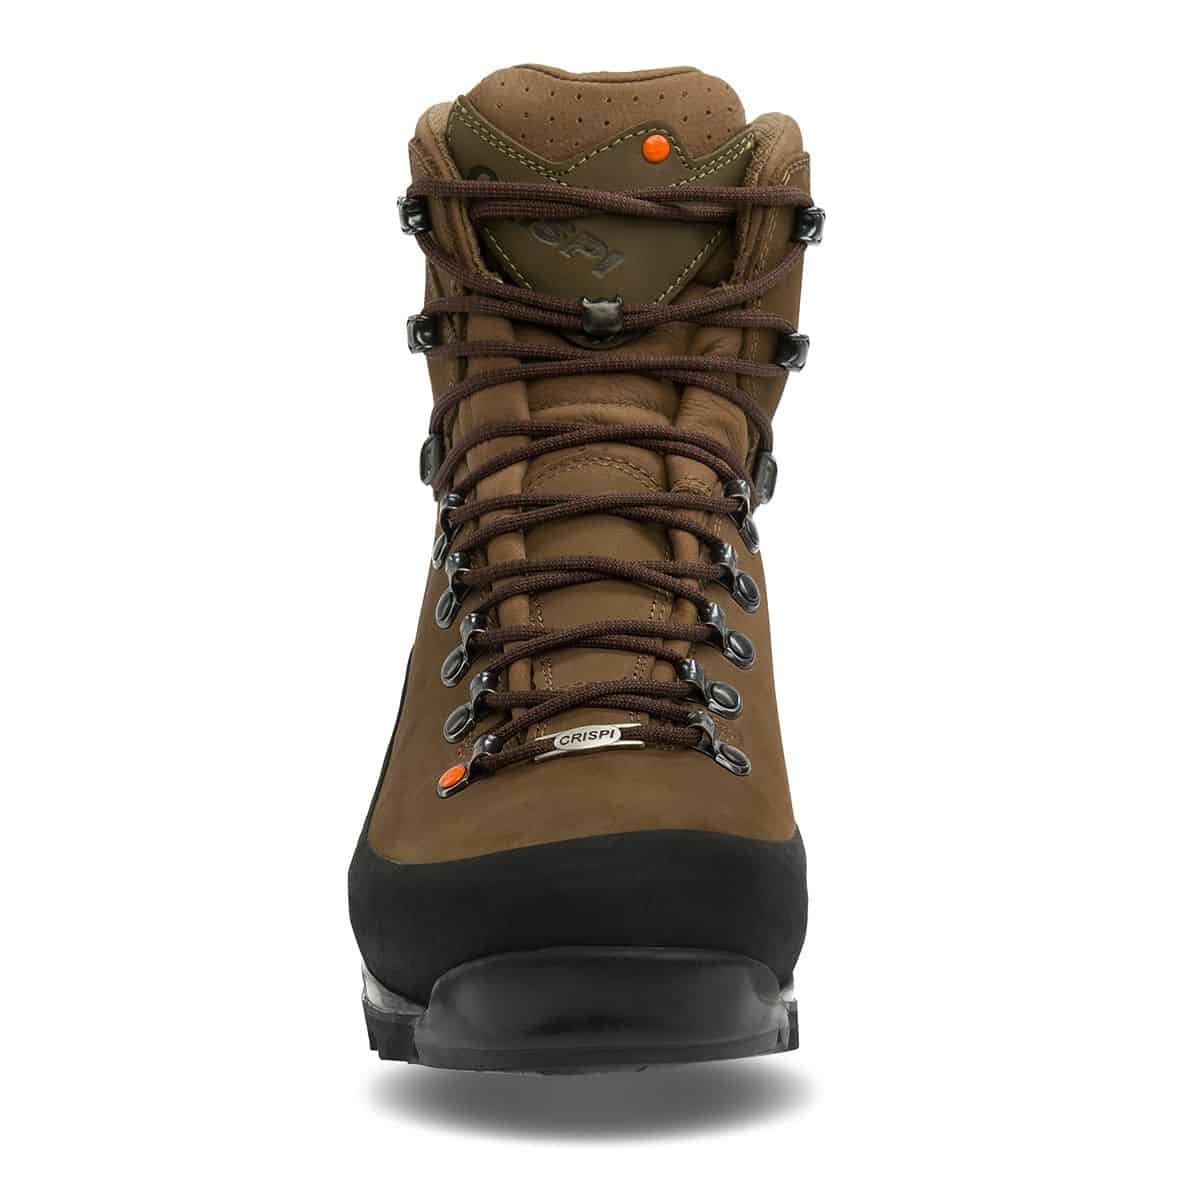 Crispi Nevada Boots - Non Insulated Hunting Boot Front